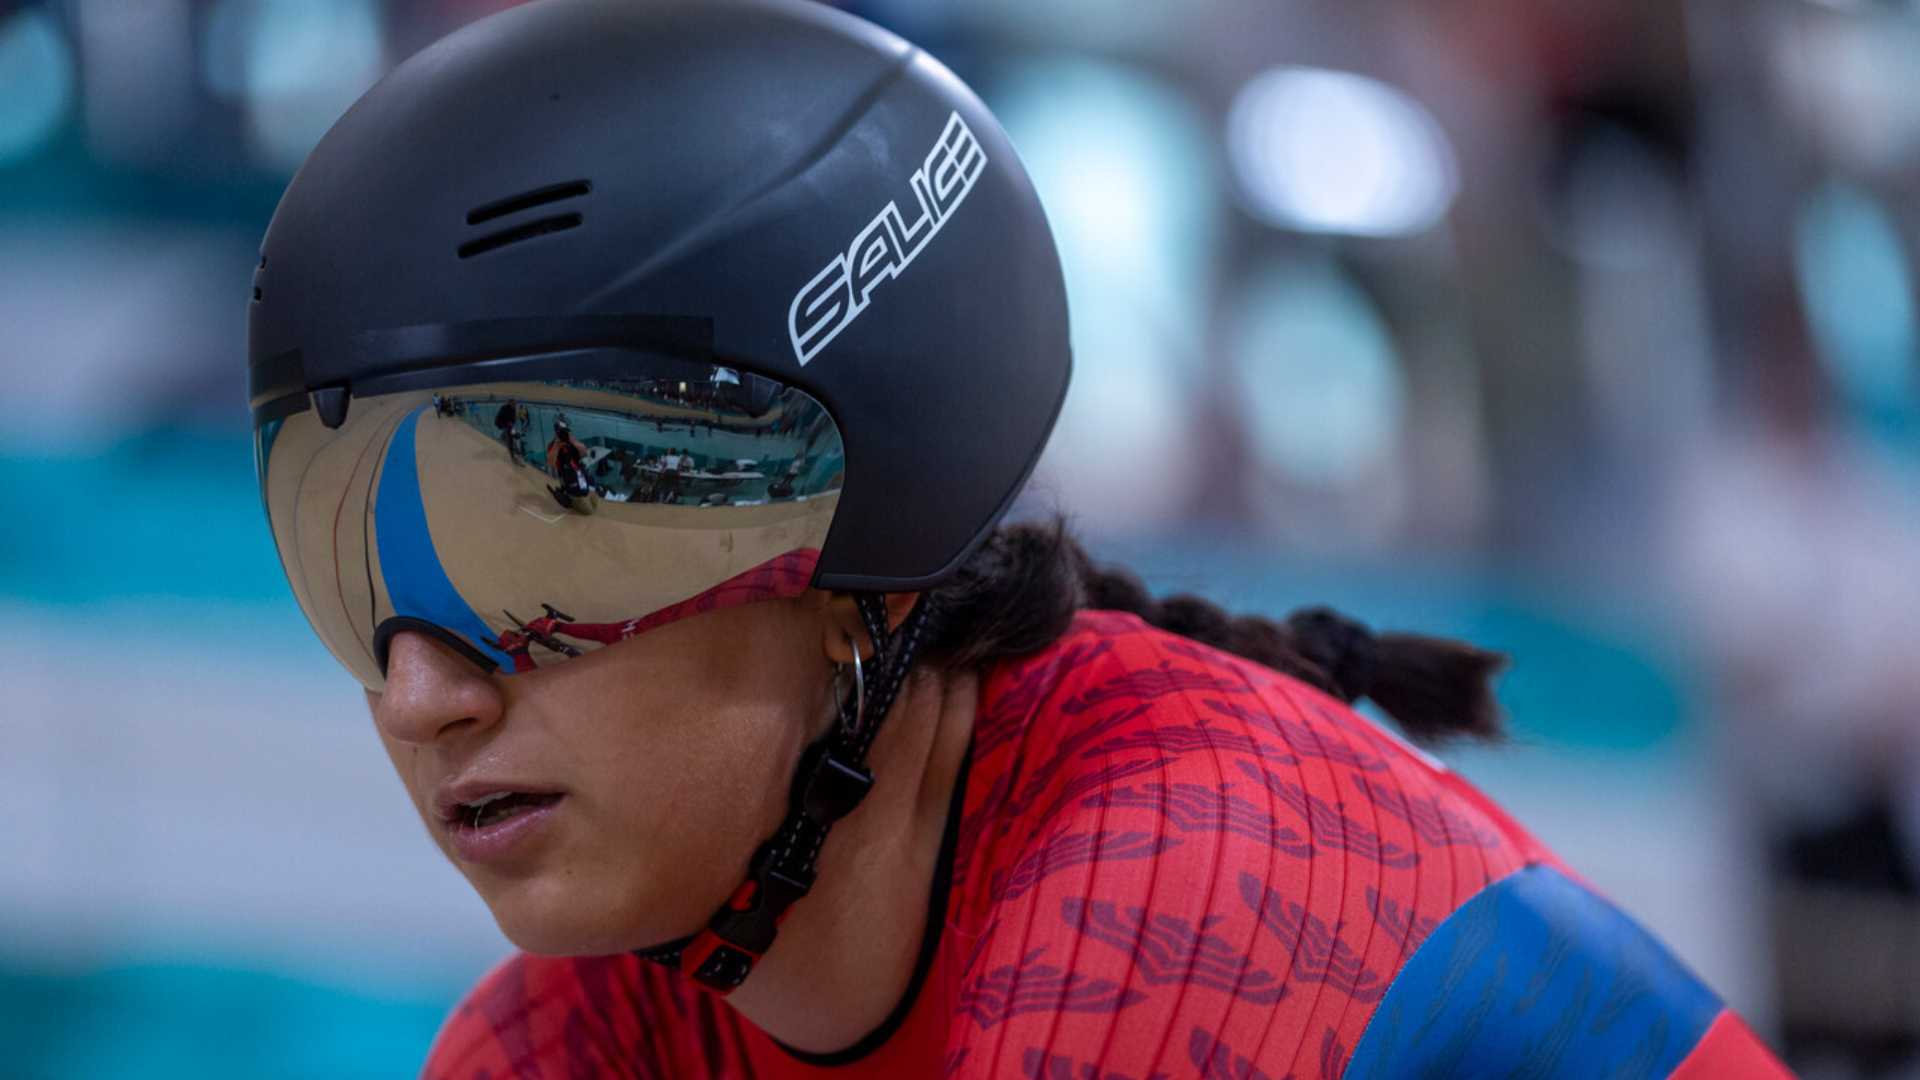 Team Chile adds new medal in Female's Omnium